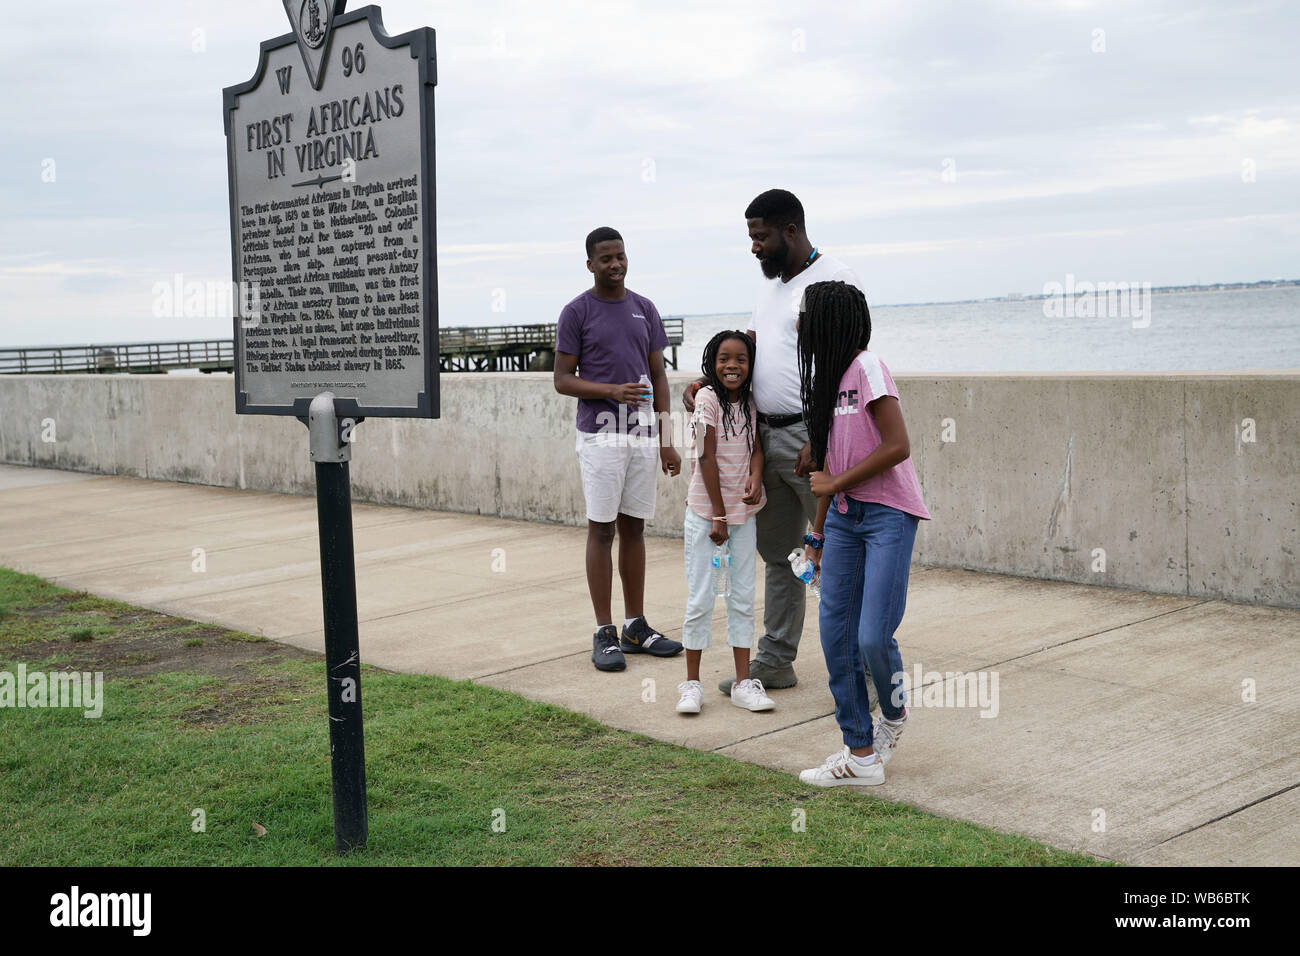 Hampton, USA. 24th Aug, 2019. People watch the First Africans in Virginia sign at Fort Monroe in Hampton, Virginia, on Aug. 24, 2019. Activities are held from Aug. 23 to 25 in commemoration of the 400th anniversary of the first African landing which occurred at Old Point Comfort in Virginia in 1619. Credit: Liu Jie/Xinhua/Alamy Live News Stock Photo